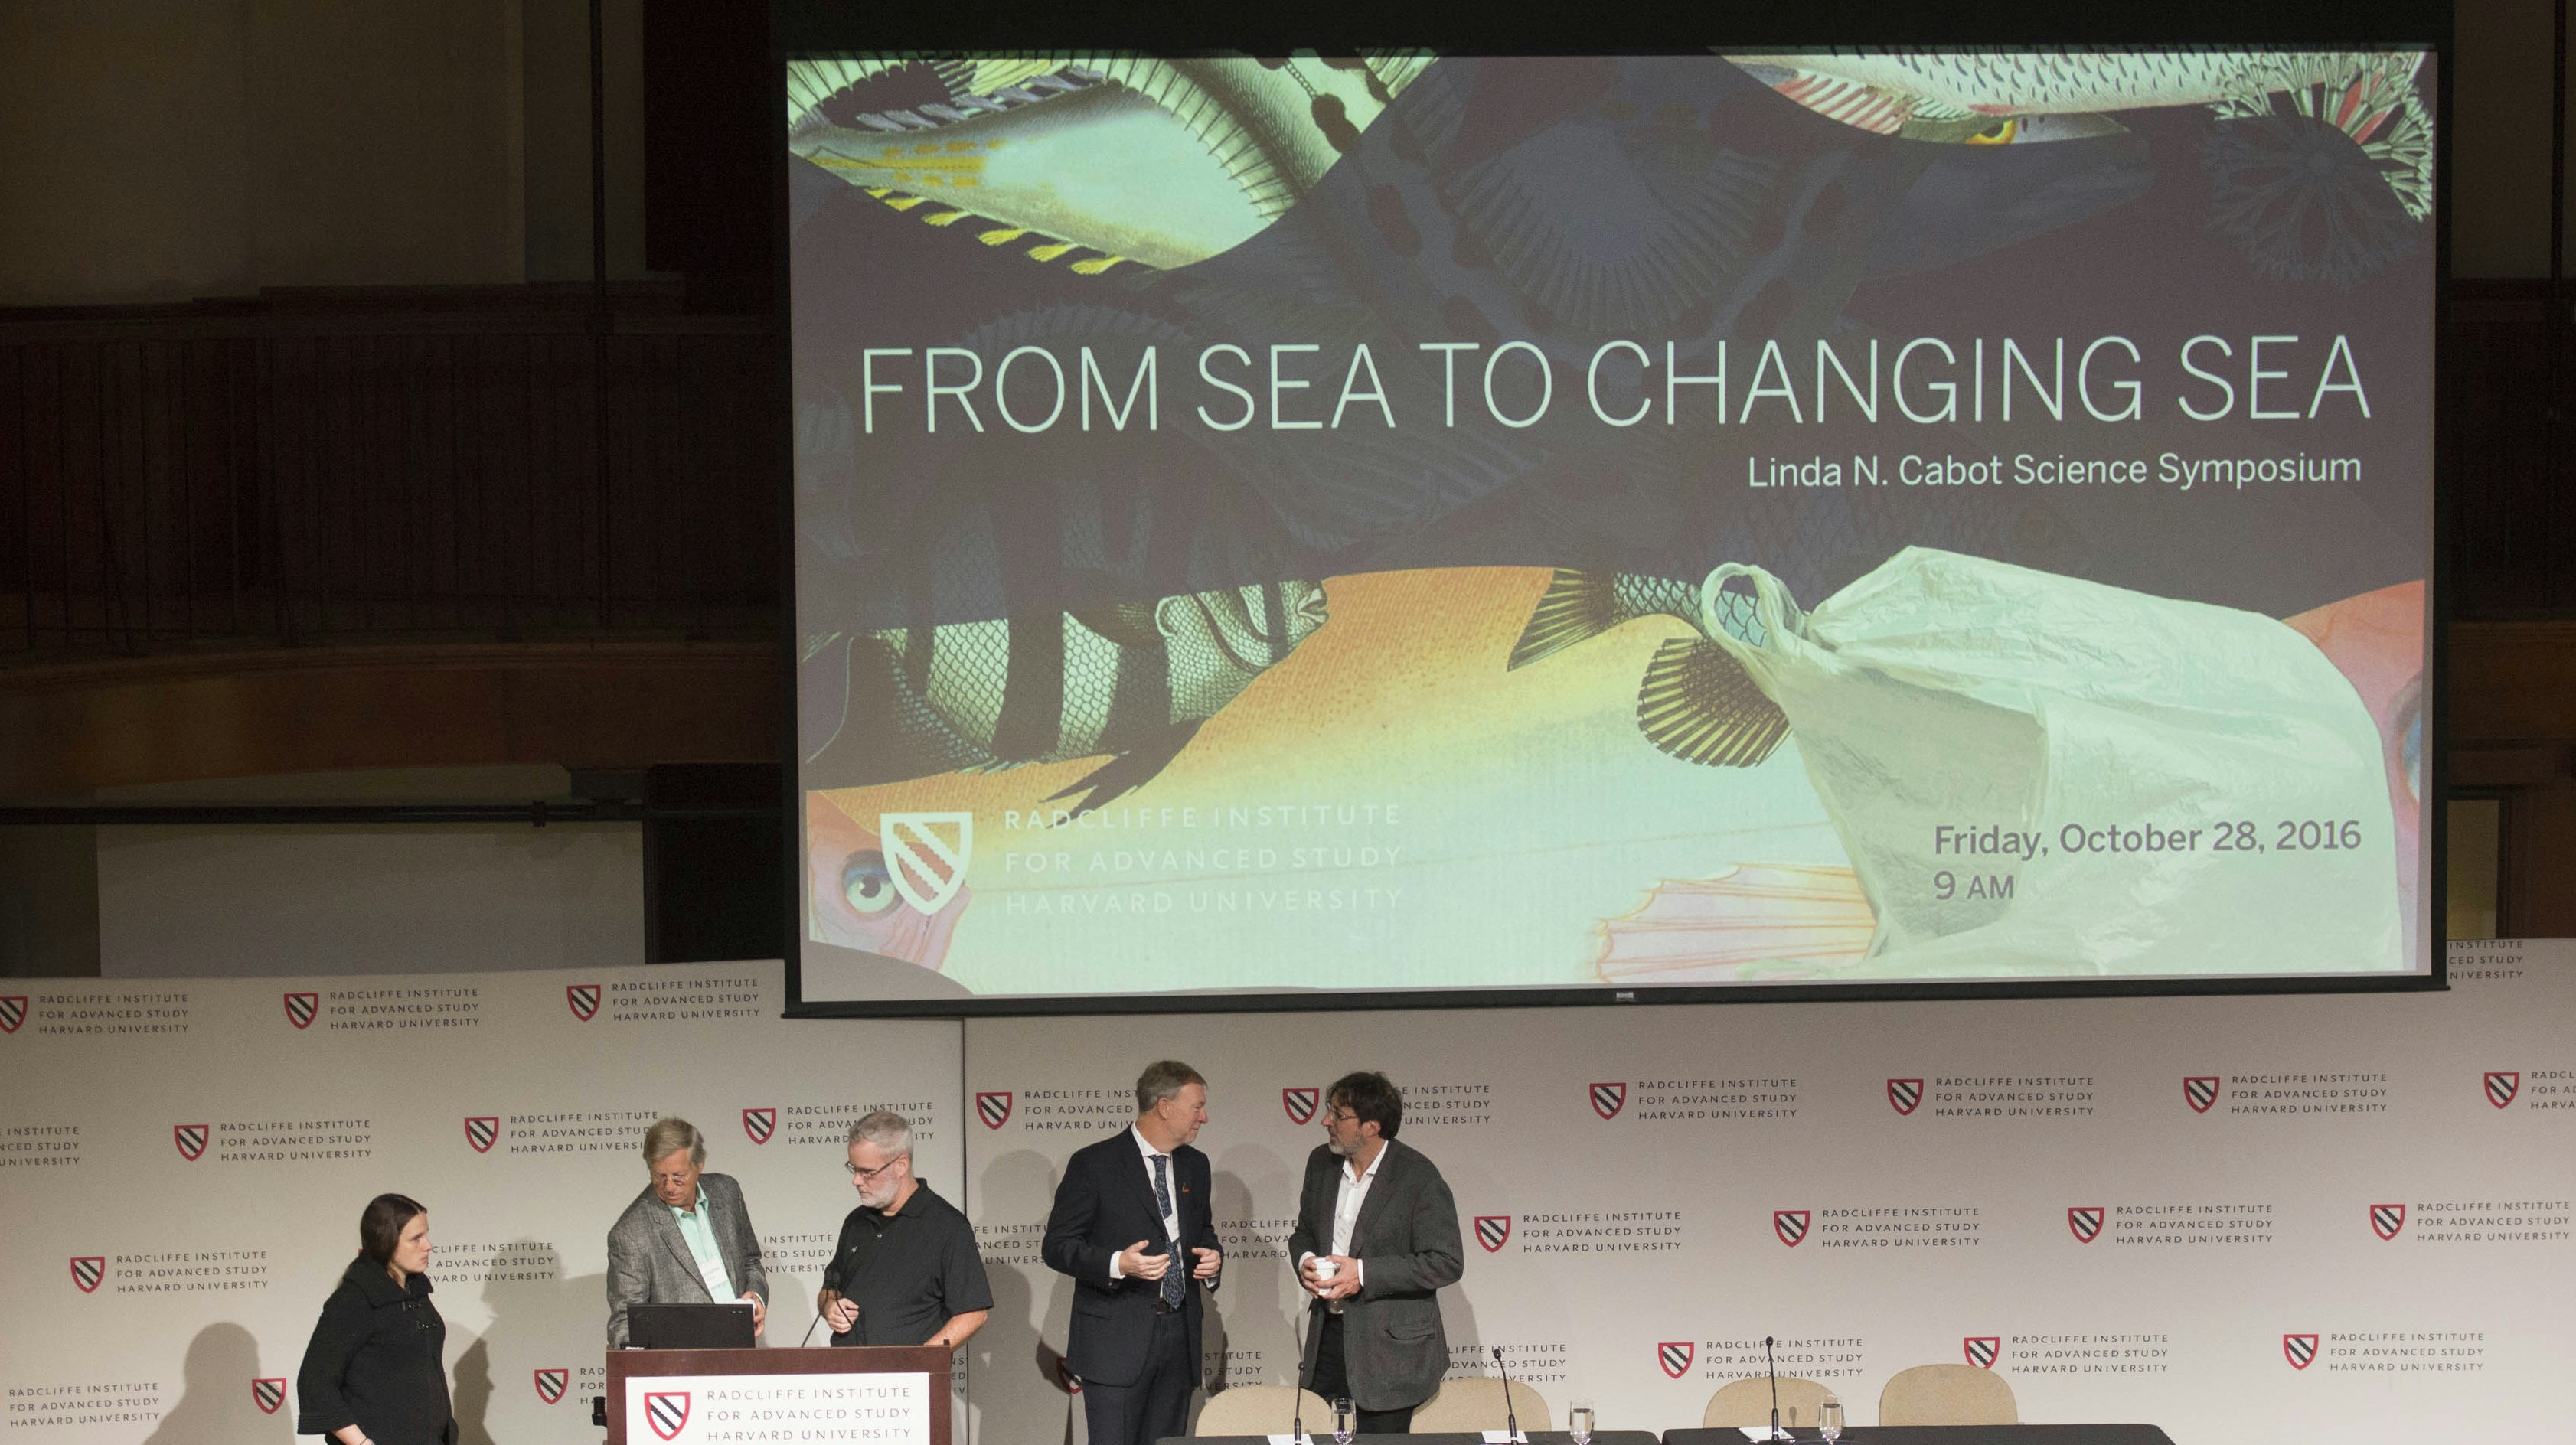 Radcliffe's "From Sea to Changing Sea" science symposium.